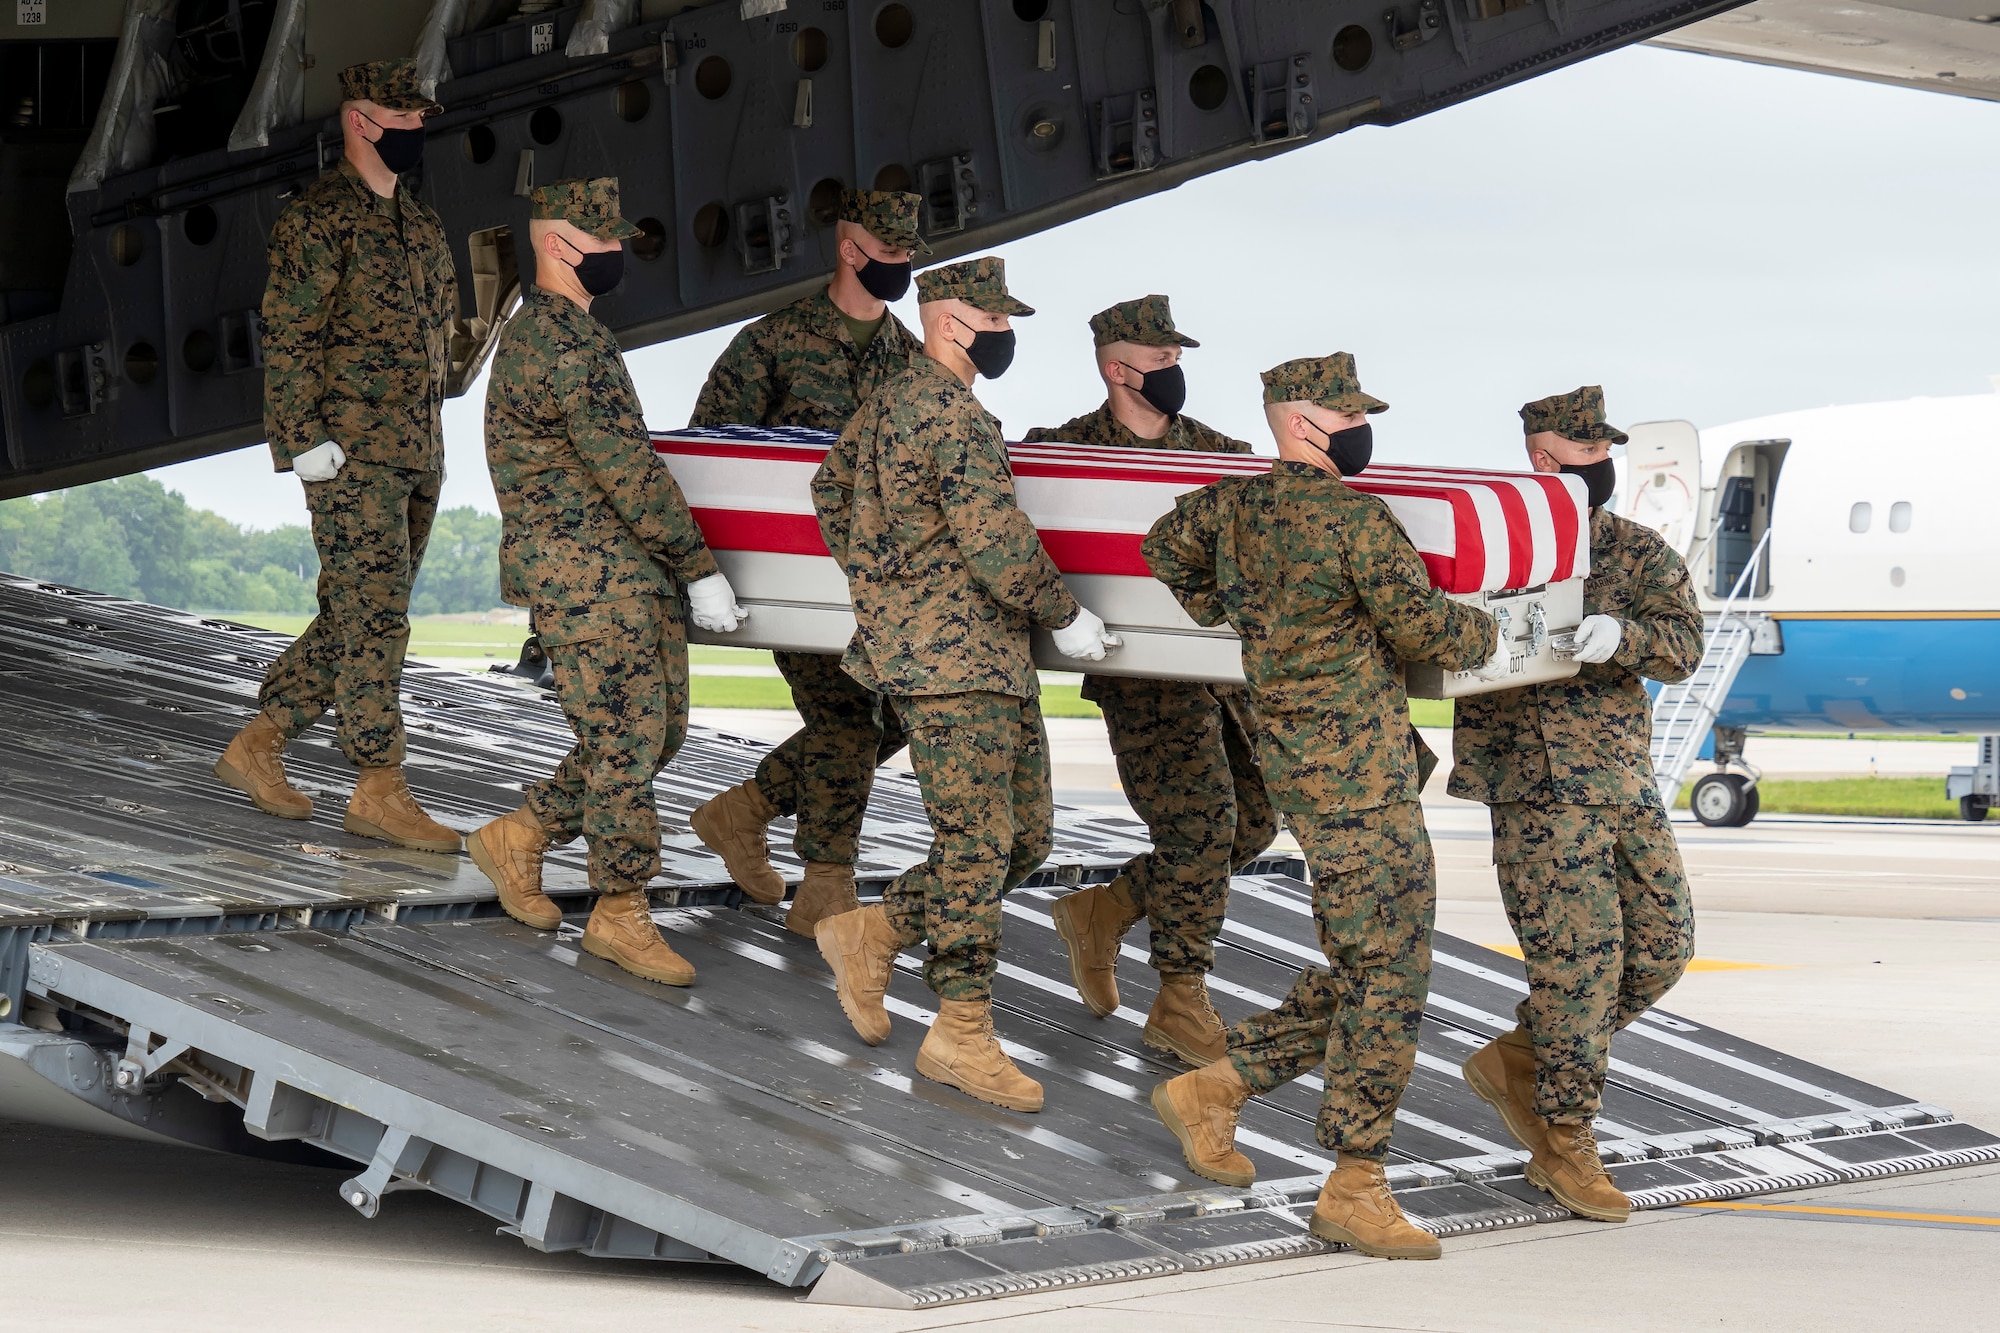 A U.S. Marine Corps carry team transfers the remains of Marine Corps Lance Cpl. Jared M. Schmitz of St. Charles, Missouri, August 29, 2021 at Dover Air Force Base, Delaware. Schmitz was assigned to 2nd Battalion, 1st Marine Regiment, 1st Marine Division, I Marine Expeditionary Force, Camp Pendleton, California. (U.S. Air Force photo by Jason Minto)